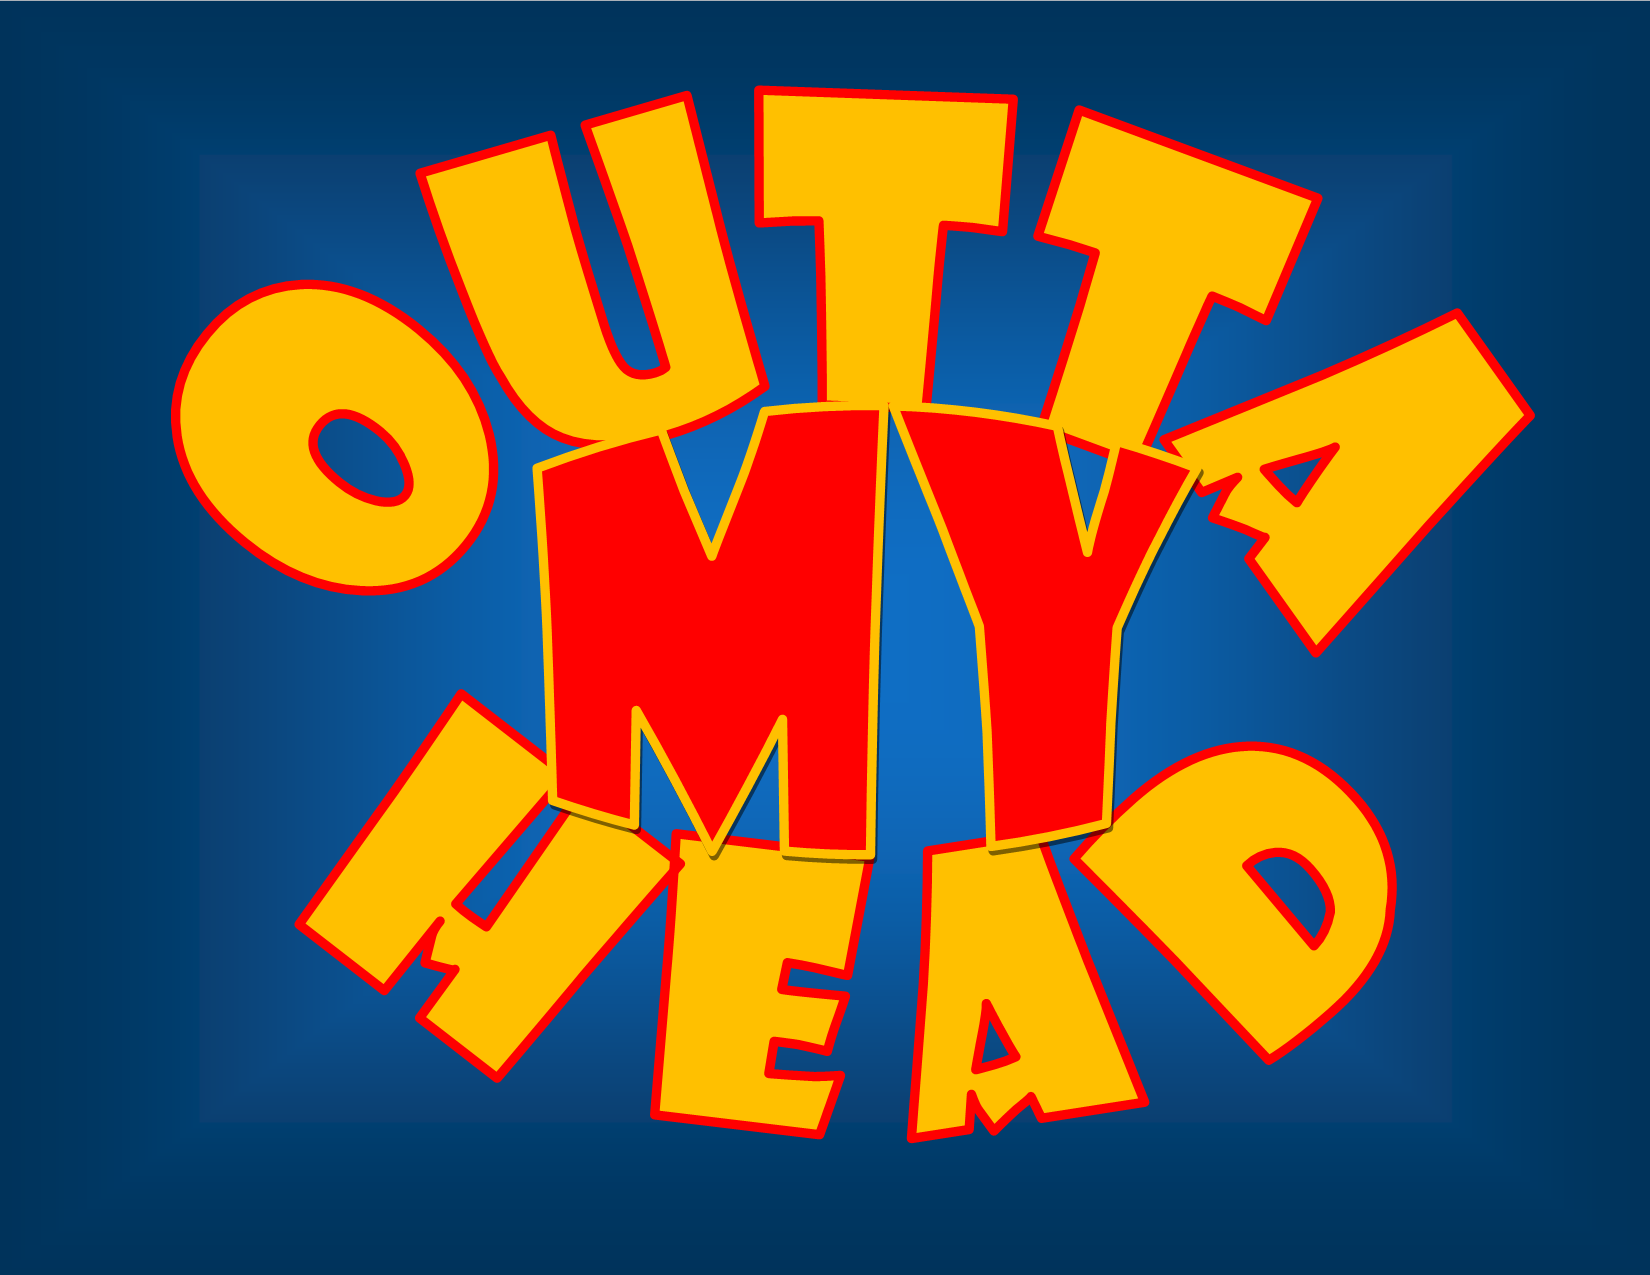 G33kpod Presents: Outta My Head Episode 3: The Berenst#in Paradox